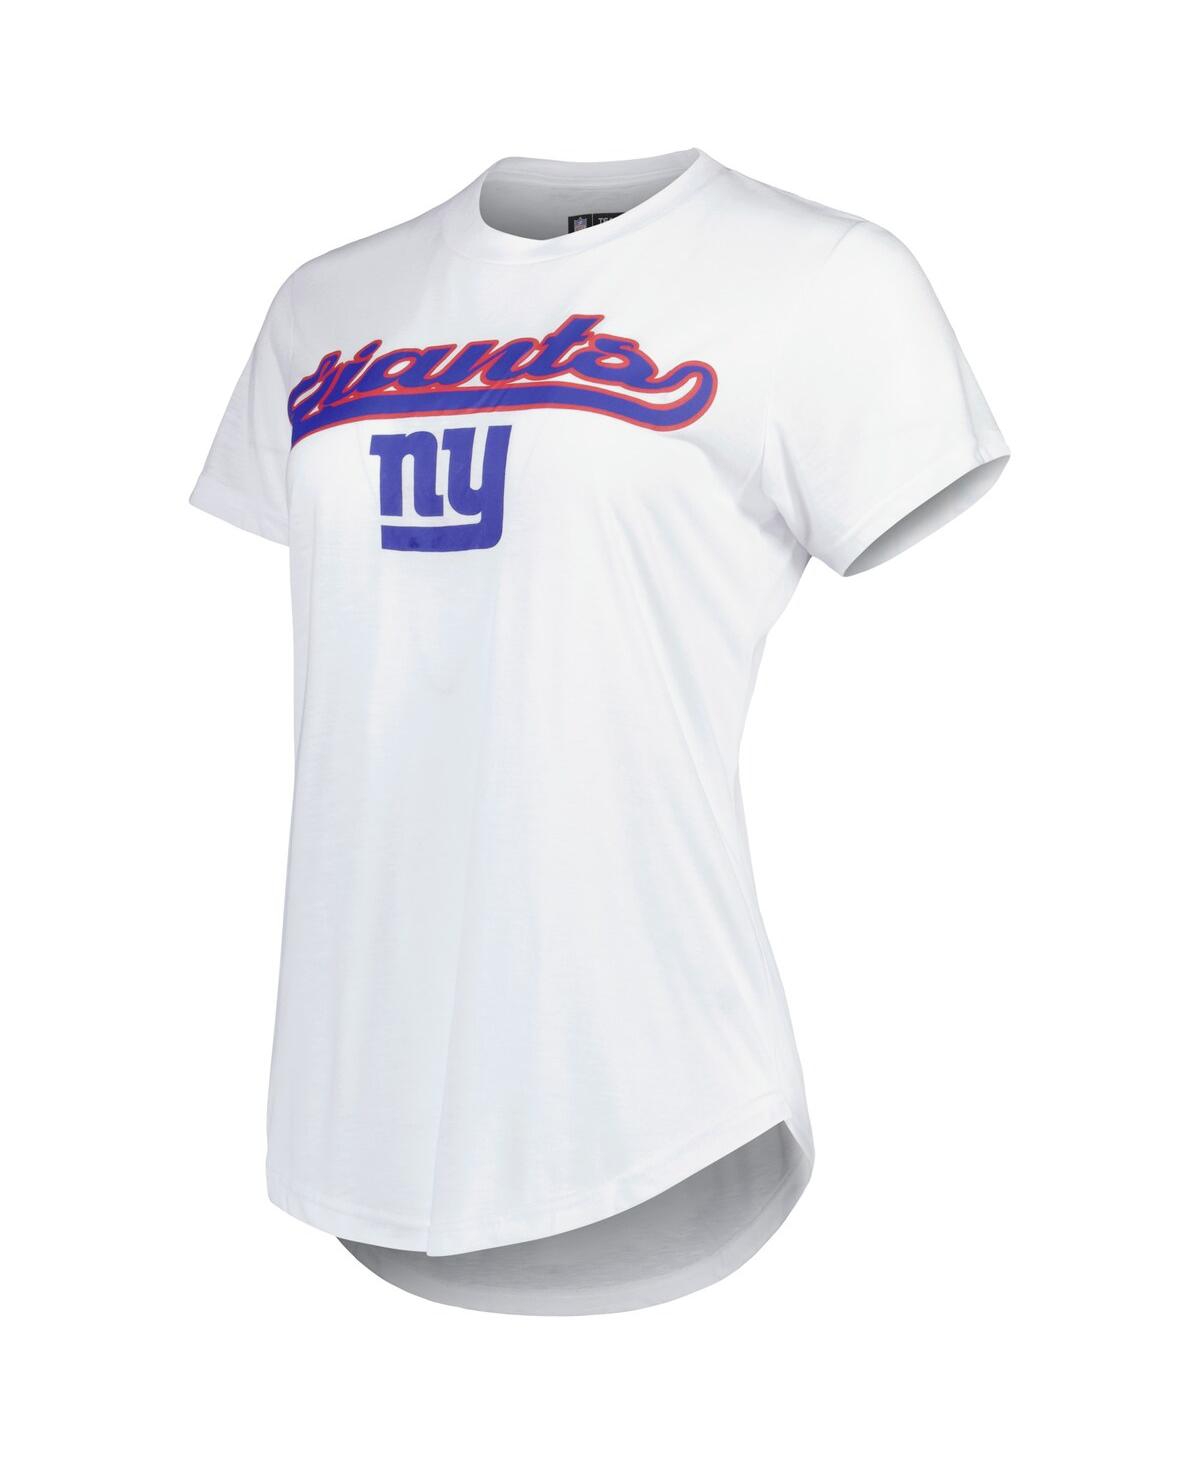 Shop Concepts Sport Women's  White, Charcoal New York Giants Sonata T-shirt And Leggings Sleep Set In White,charcoal